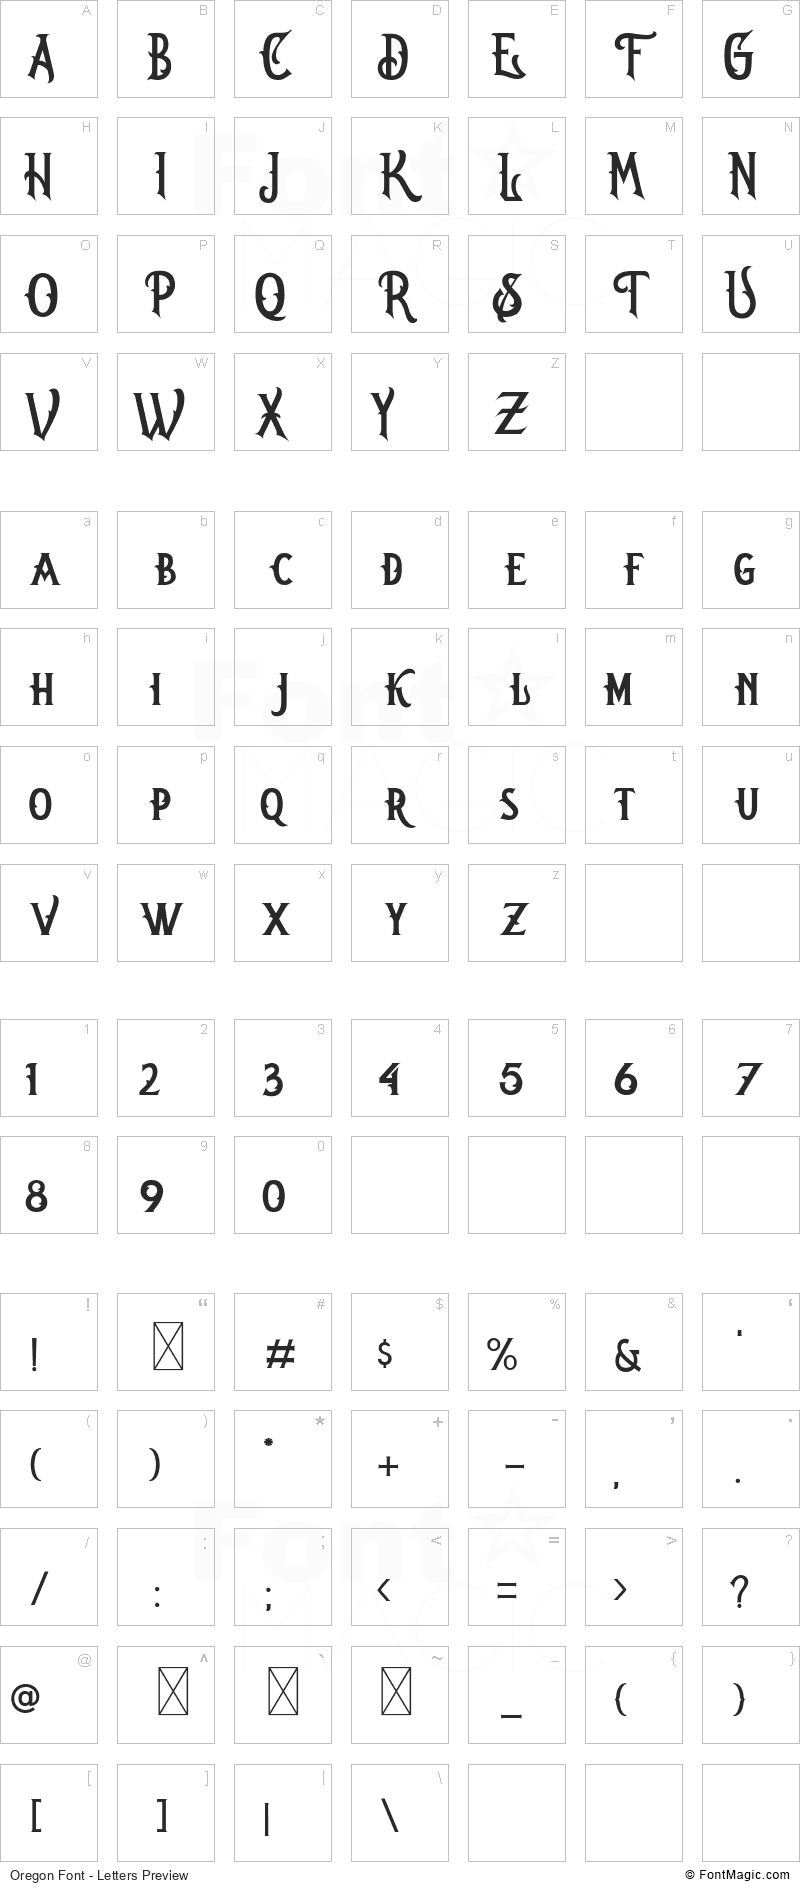 Oregon Font - All Latters Preview Chart